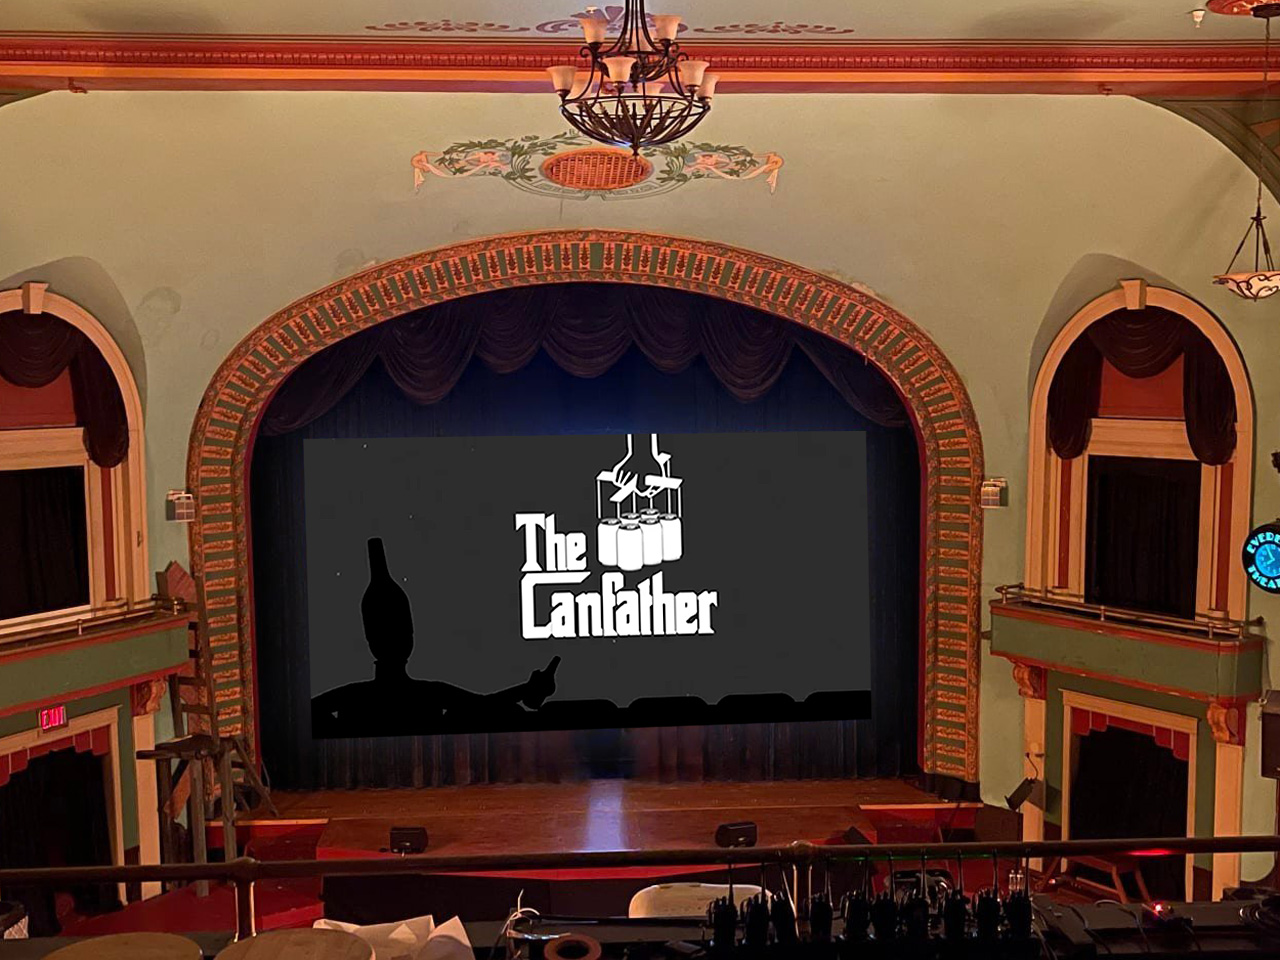 The Canfather, Everett Theater in Delaware